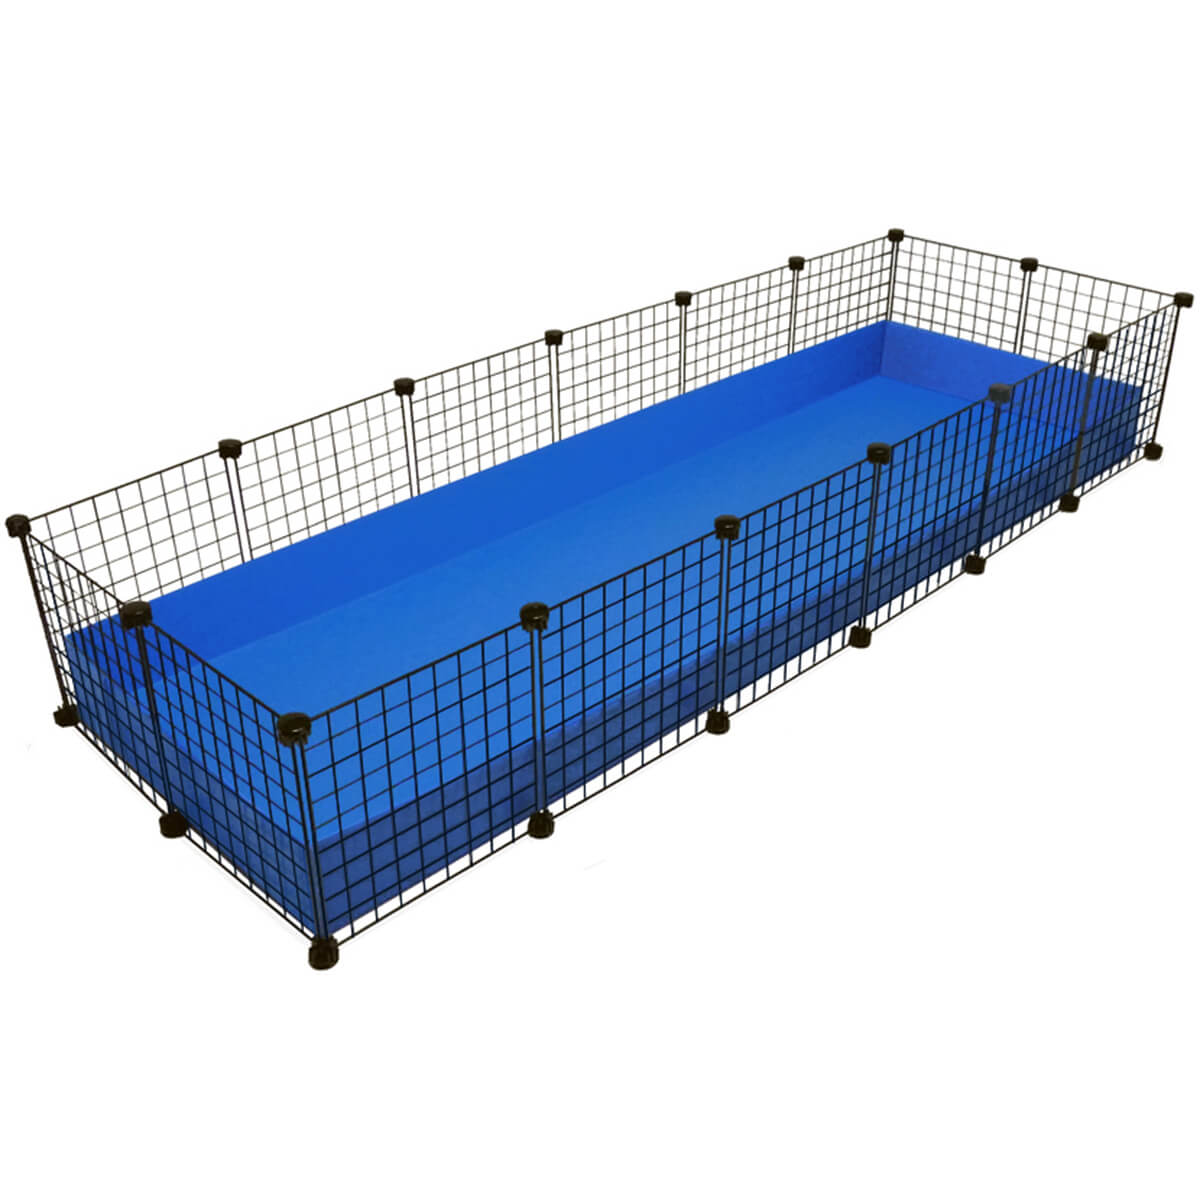 Jumbo Royal Blue C&C guinea pig cage with black grids and connectors